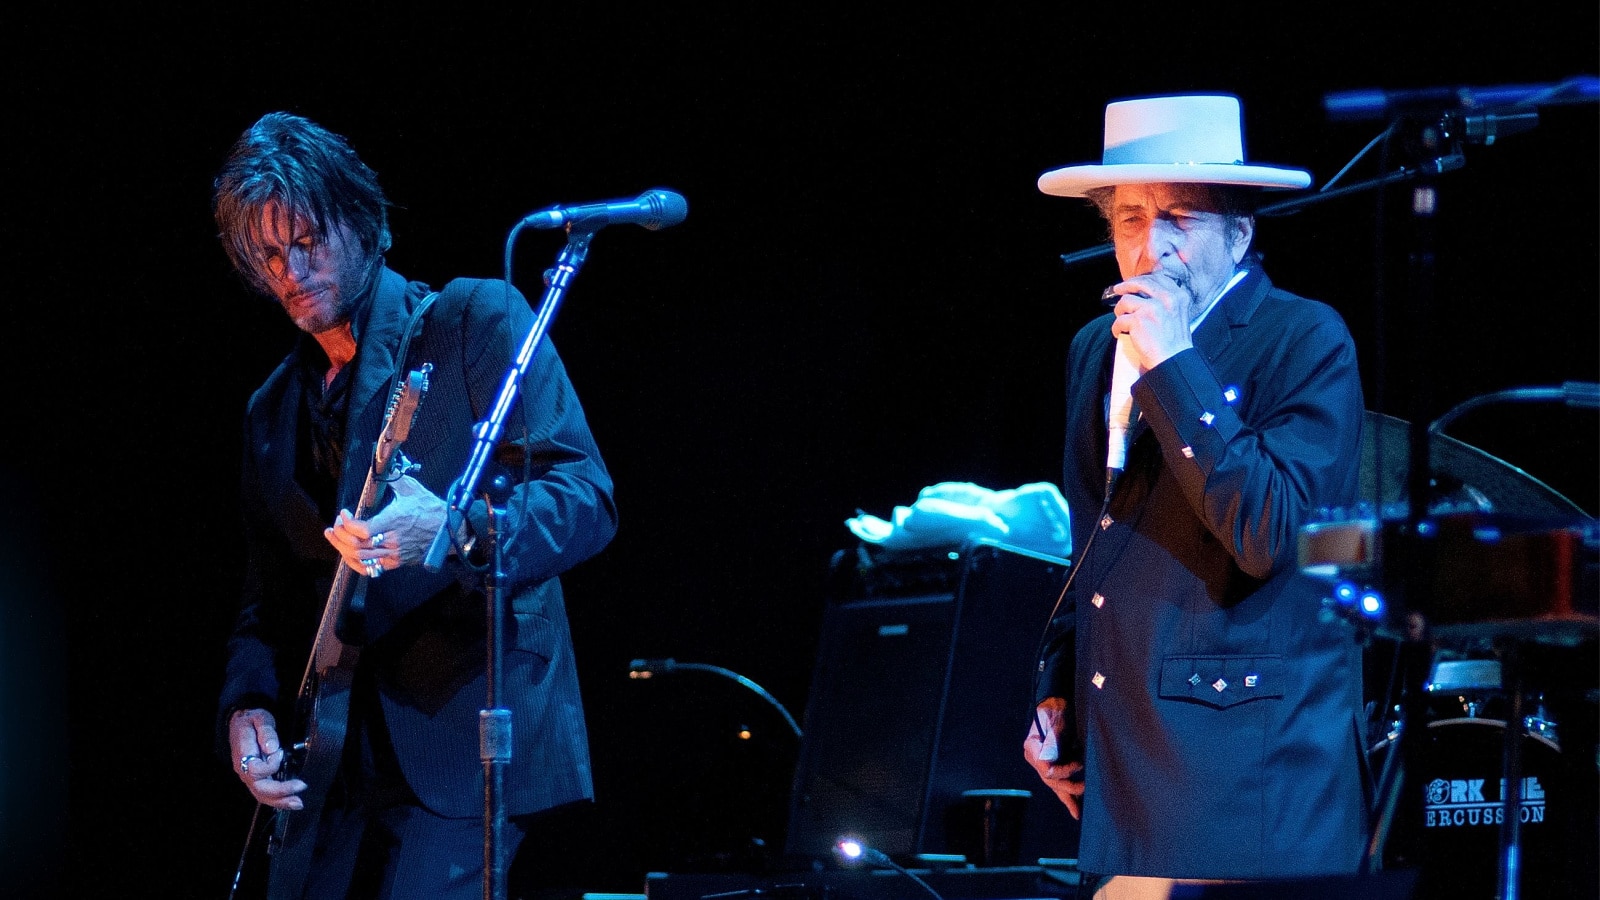 BENICASSIM, SPAIN - JULY 13: Bob Dylan performs at FIB on July 13, 2012 in Benicassim, Spain. Festival Internacional de Benicassim.